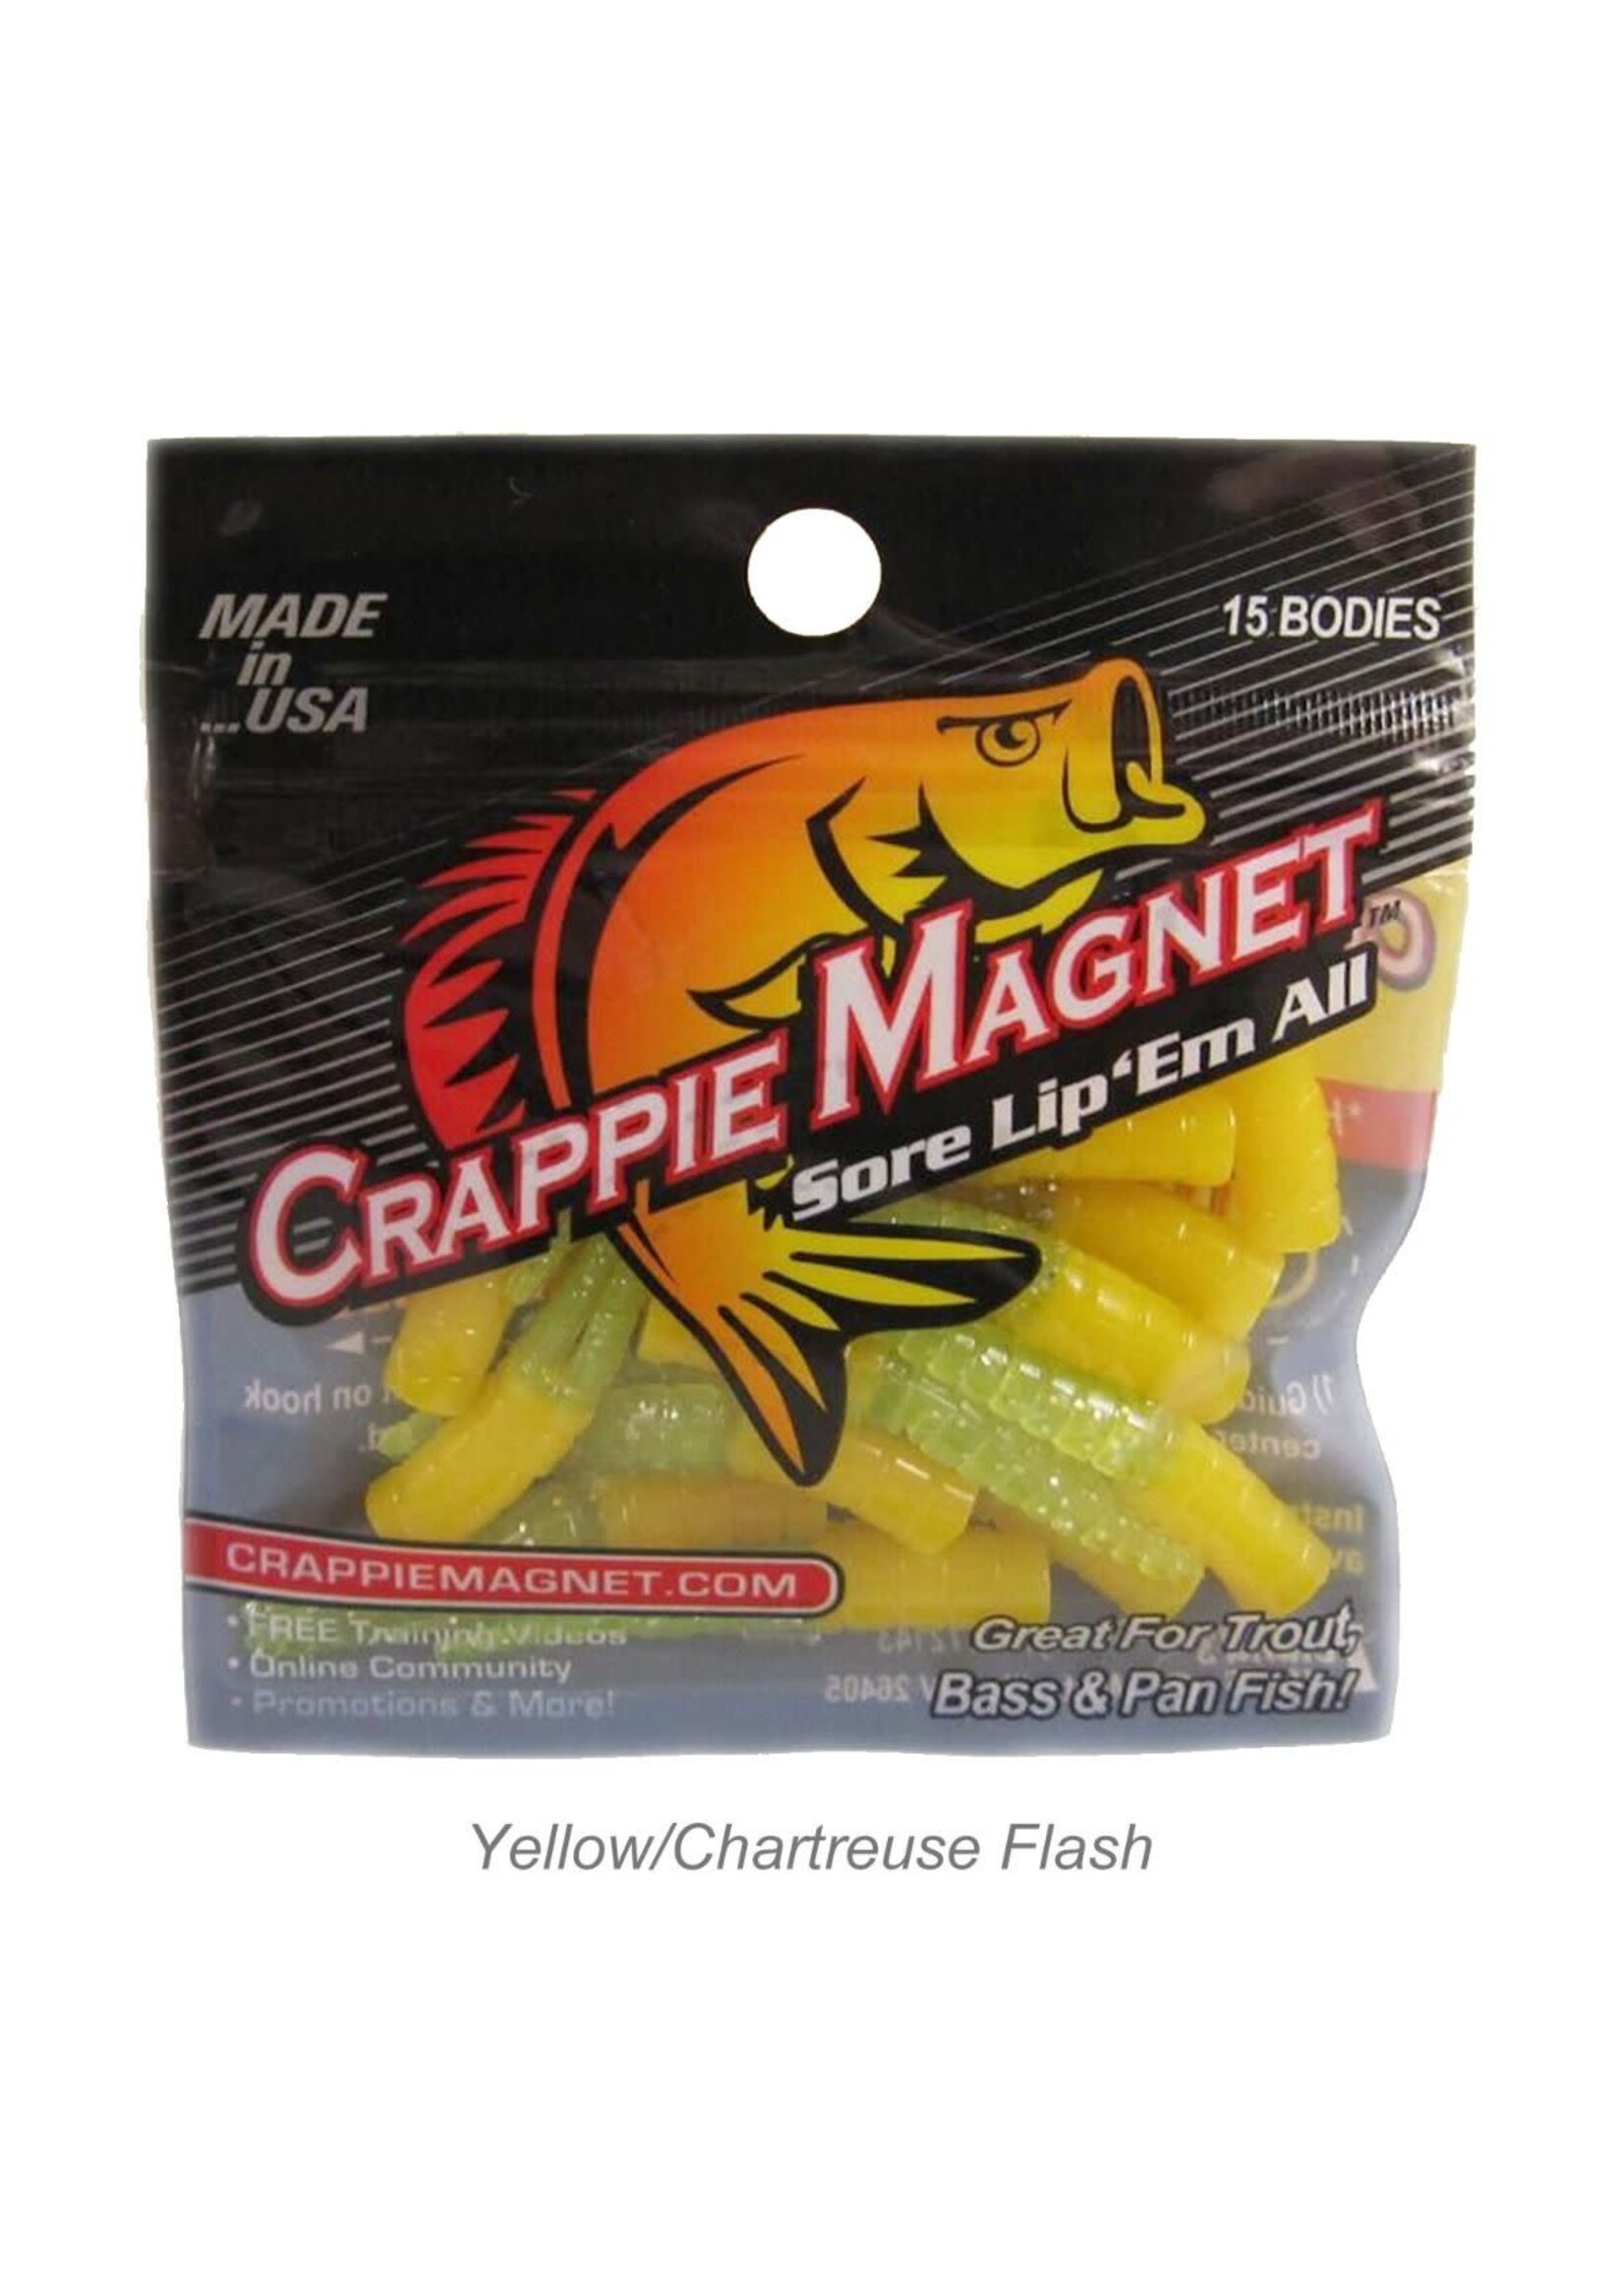 Crappie Magnet Crappie Magnet 15pc body pack